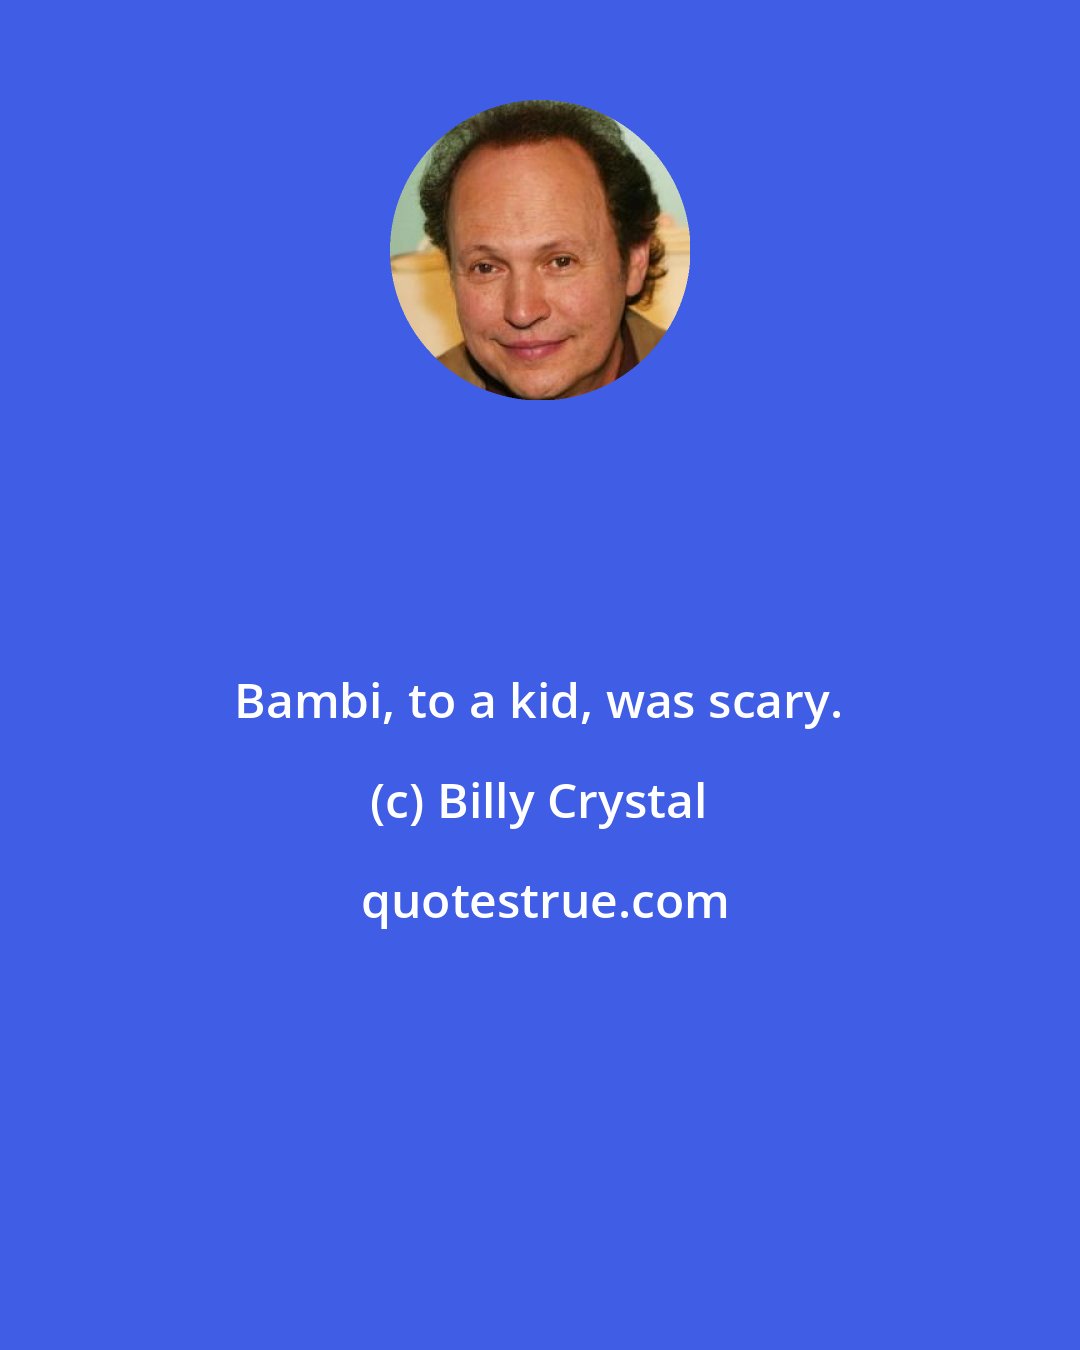 Billy Crystal: Bambi, to a kid, was scary.